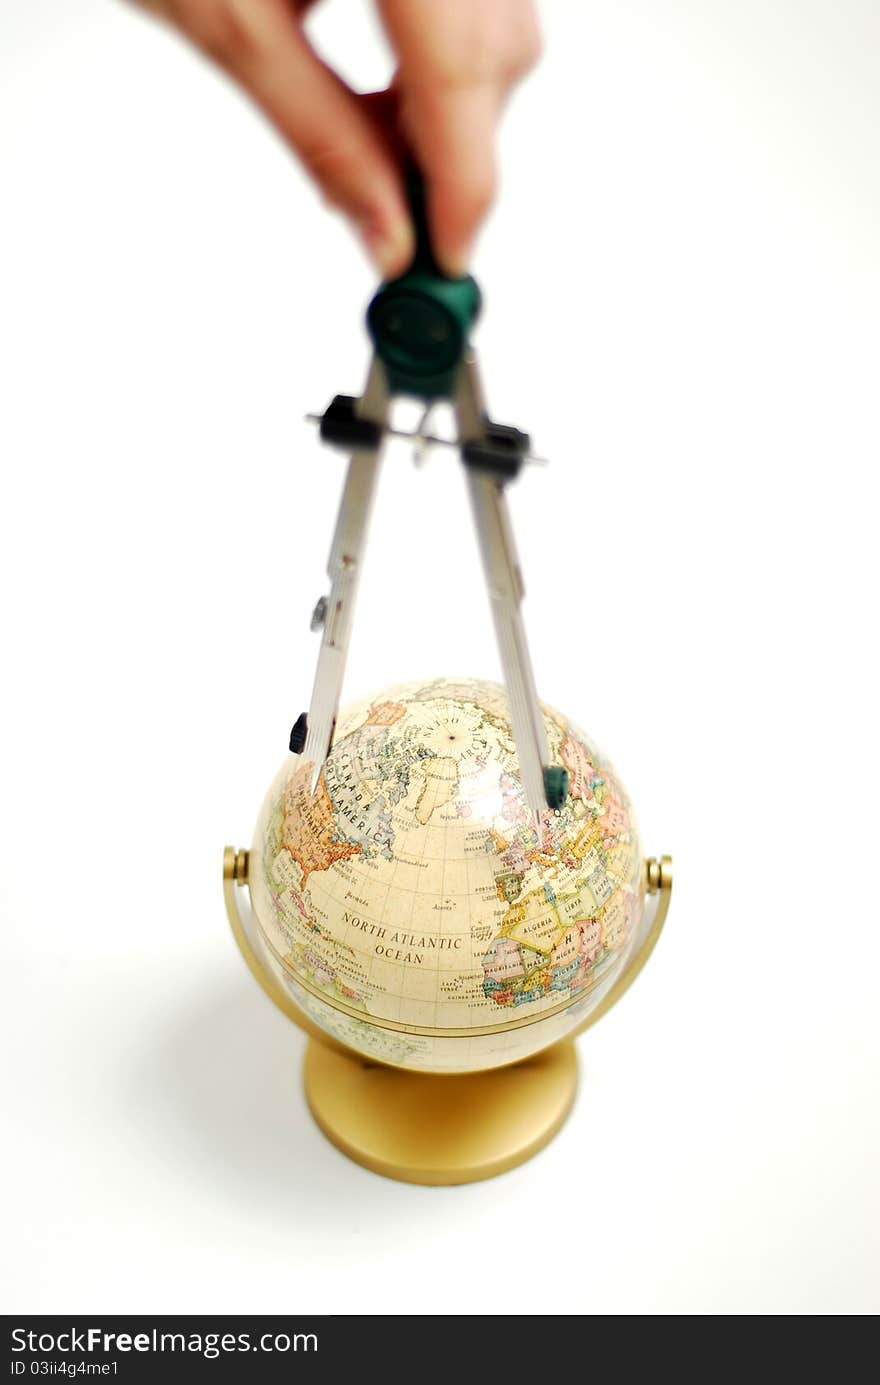 Studying the globe with a compass. Studying the globe with a compass